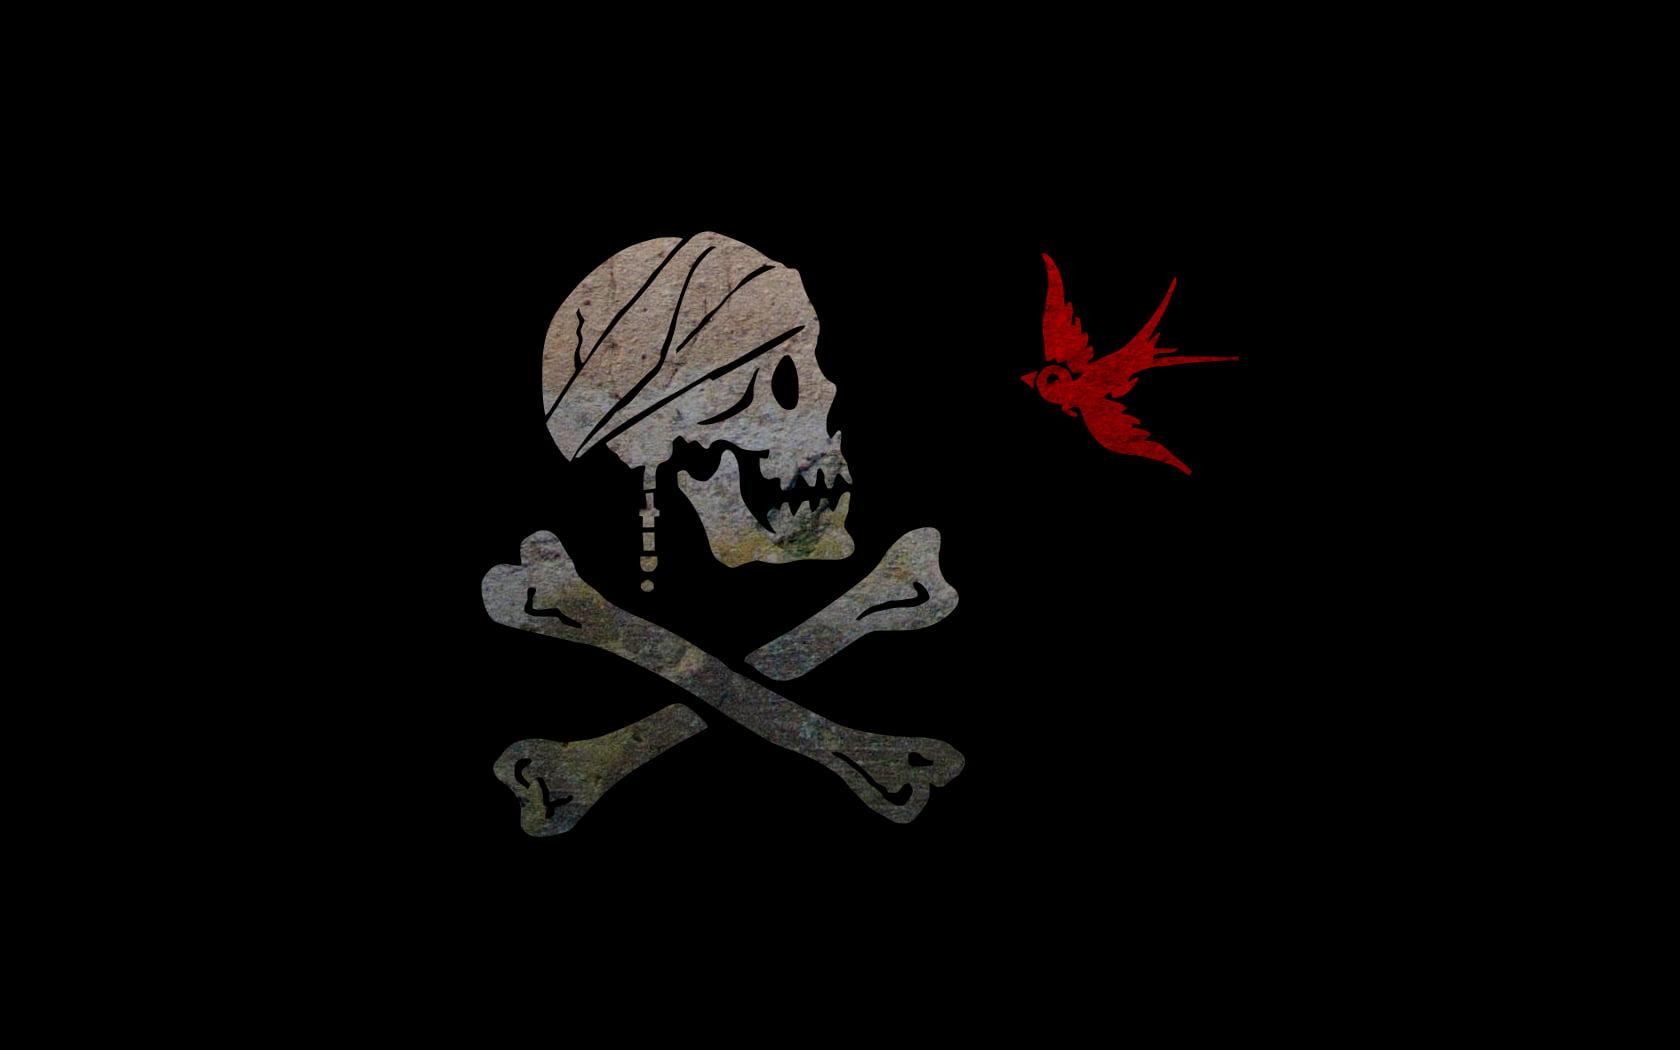 Pirates Of The Caribbean, Jack Sparrow, Pirate Flag Of Jack